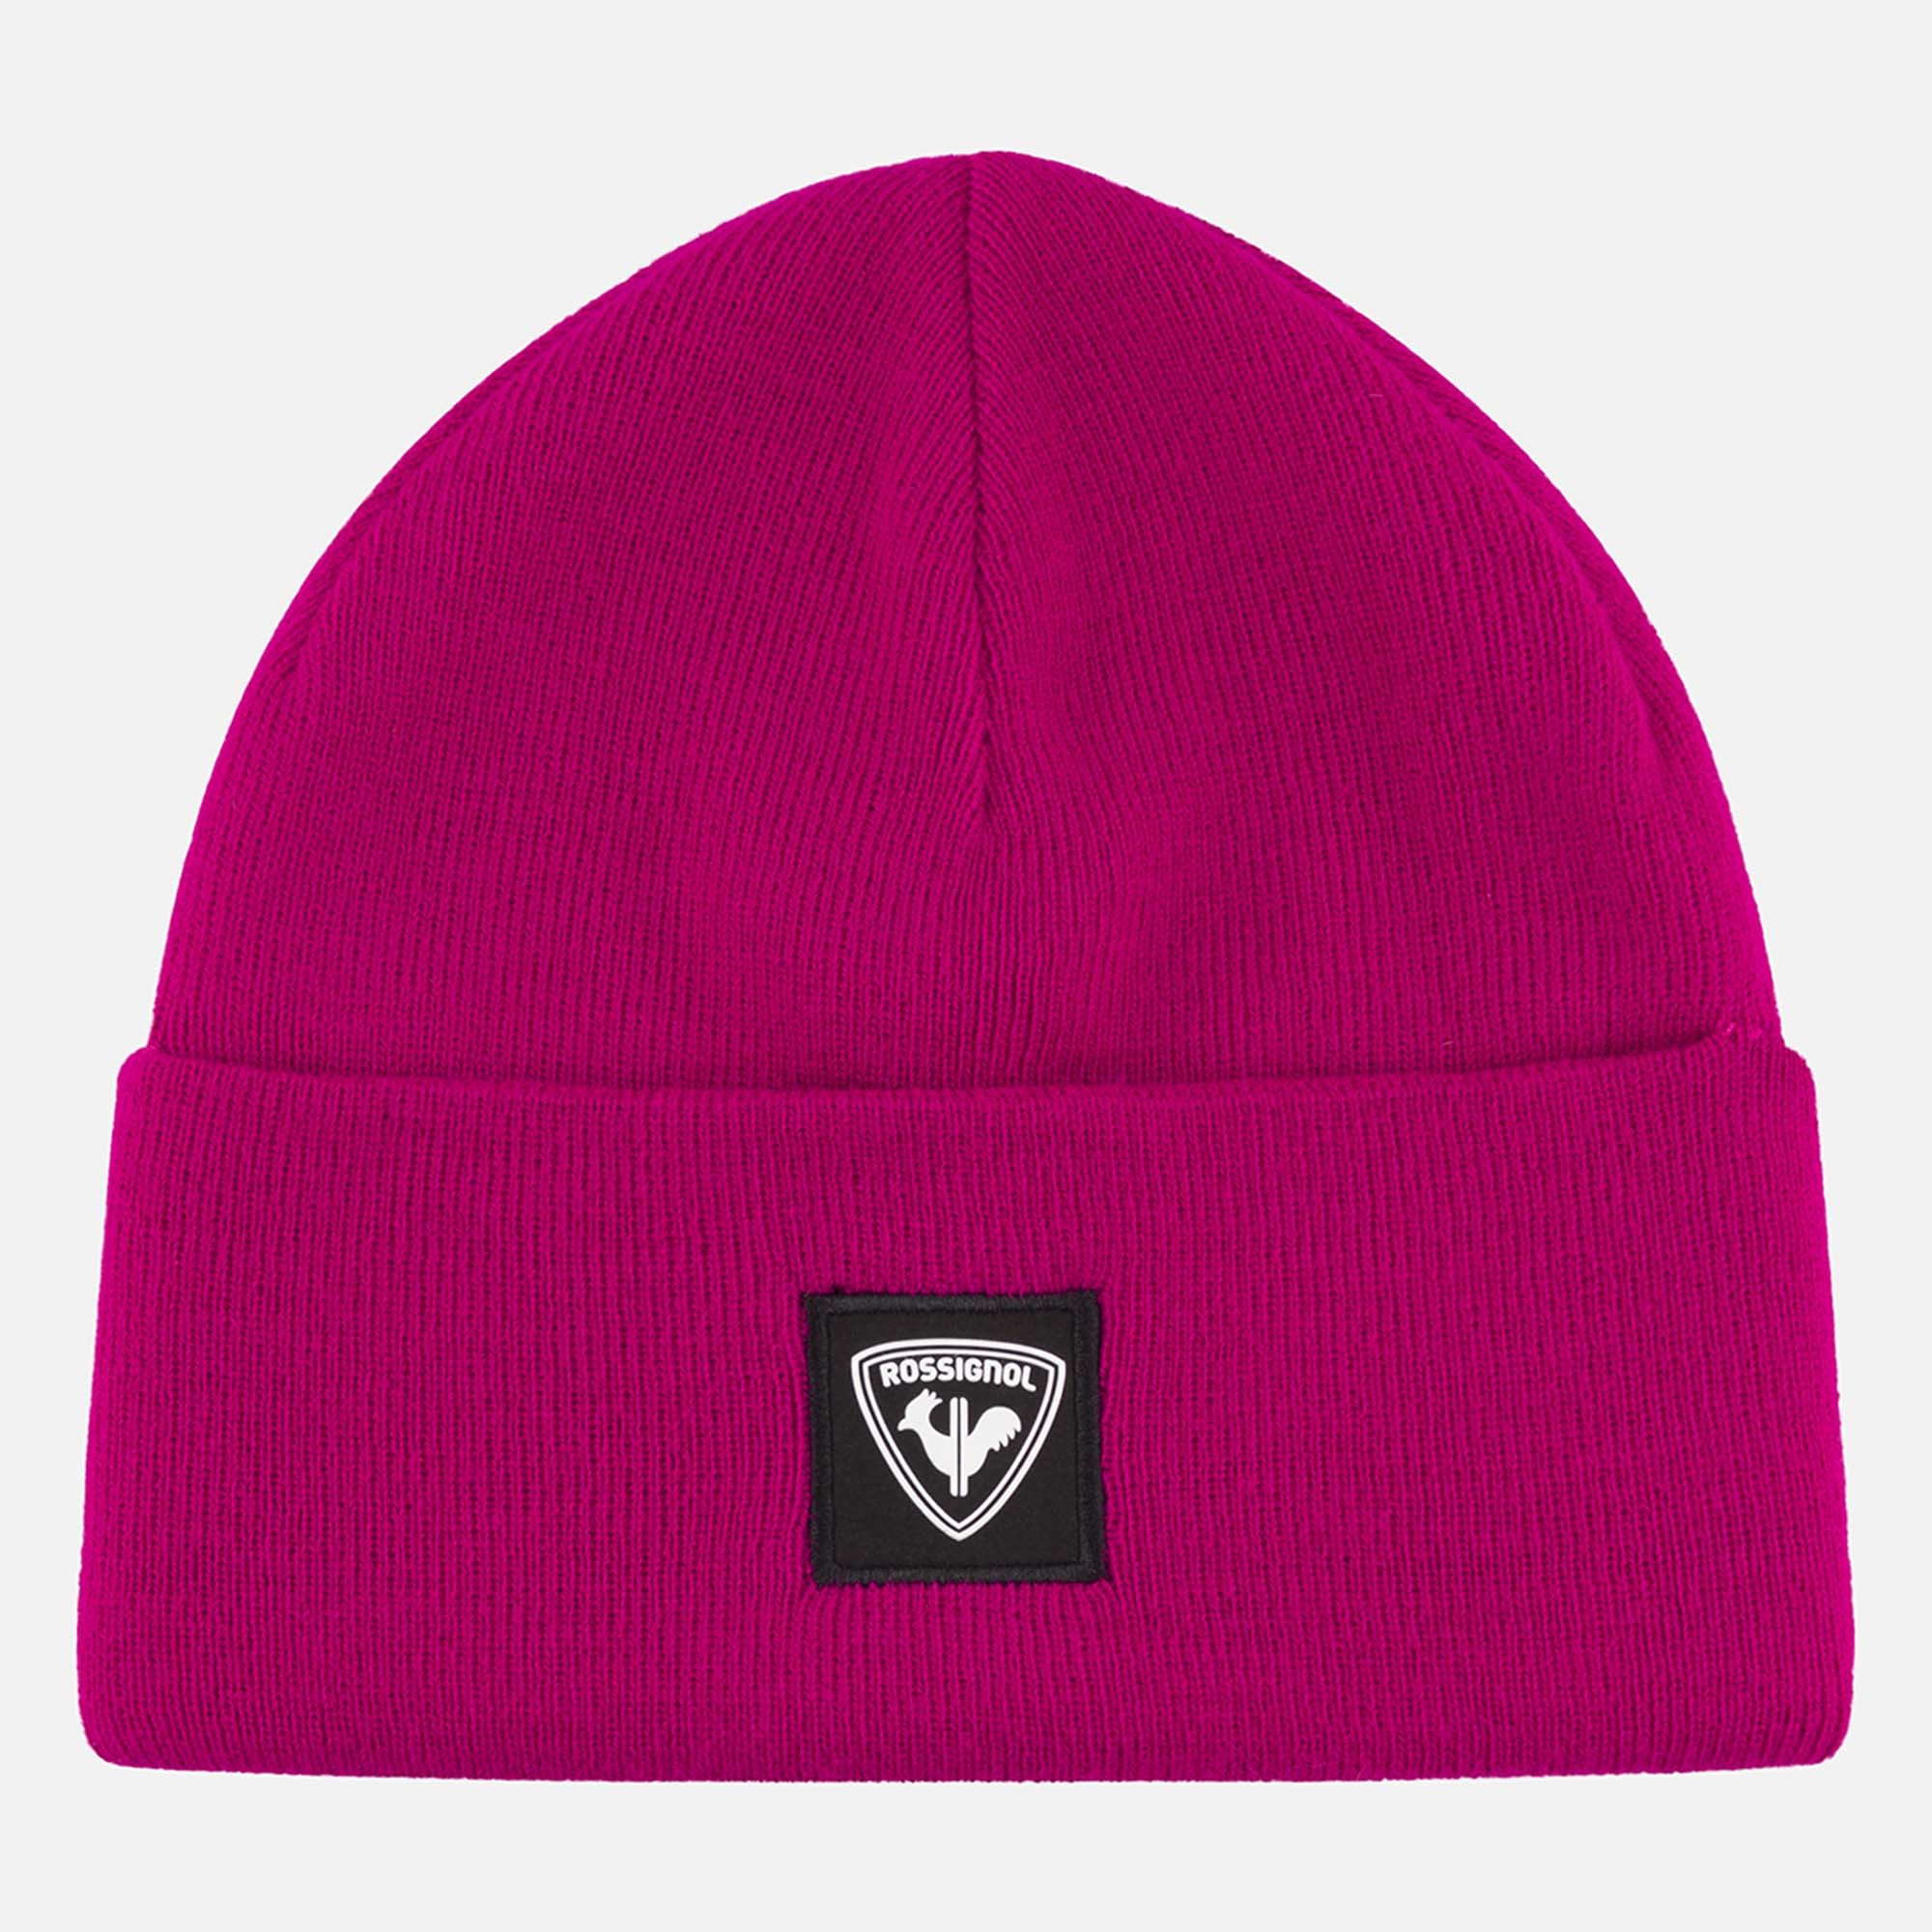 Gorro Zely para mujer